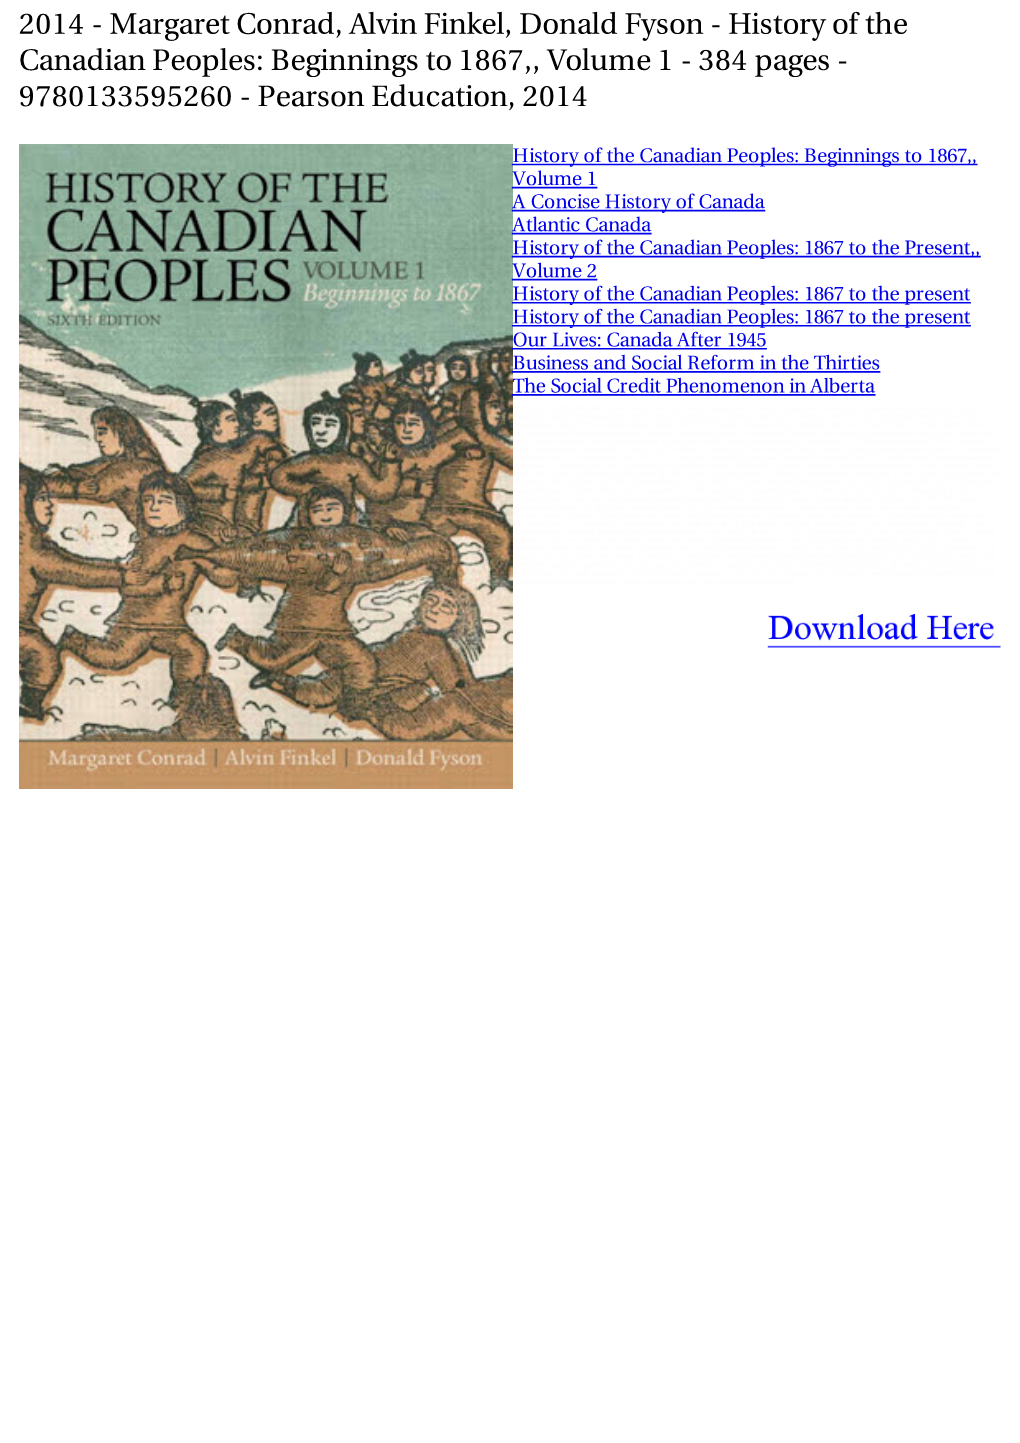 History of the Canadian Peoples: Beginnings to 1867,, Volume 1 - 384 Pages - 9780133595260 - Pearson Education, 2014